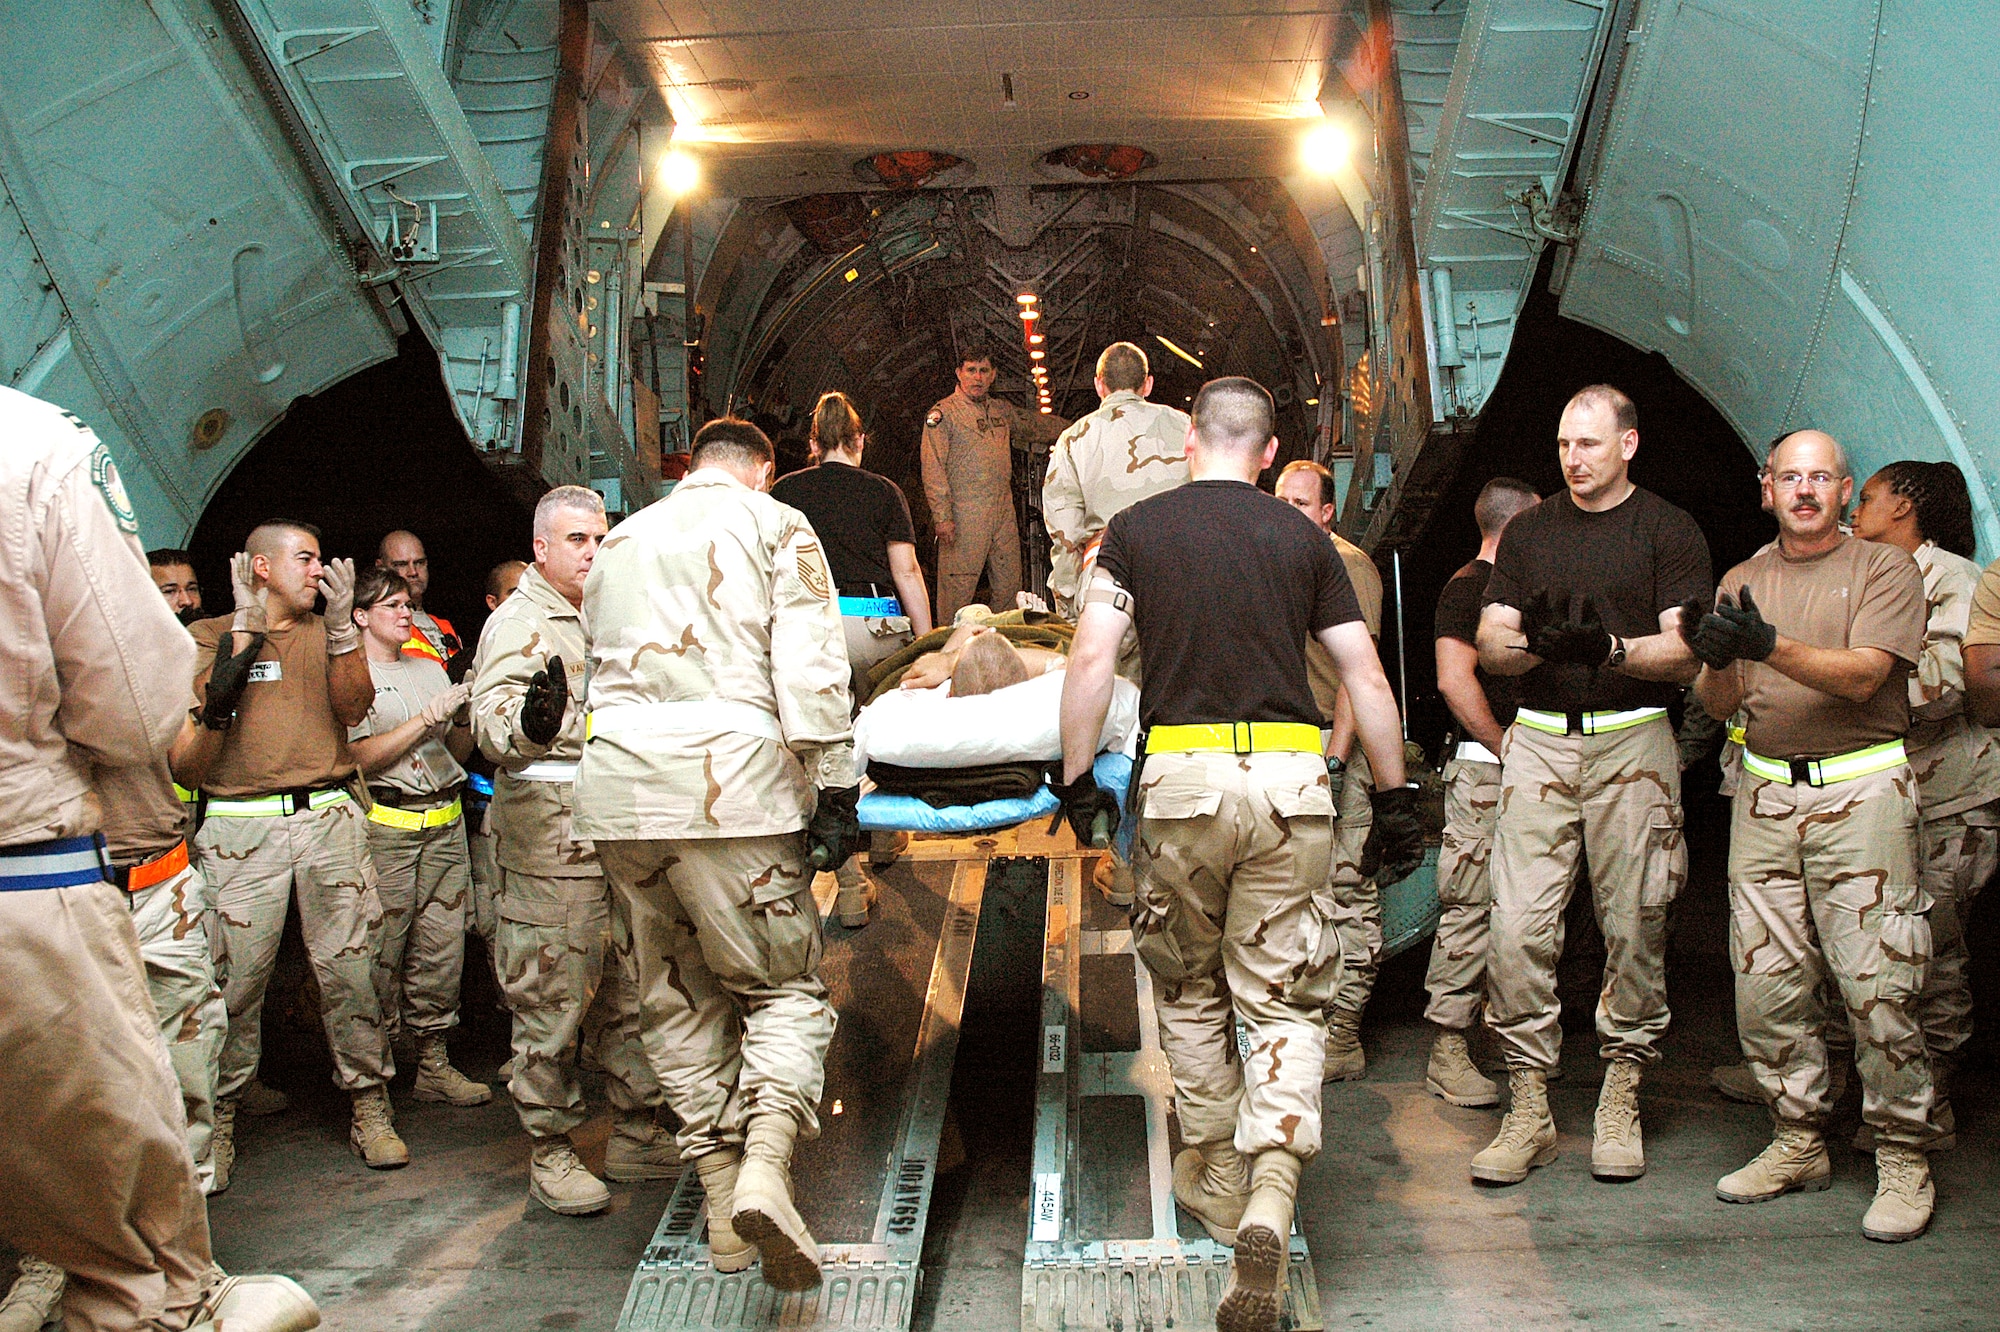 BALAD AIR BASE, Iraq -- Airmen applaud and cheer, thanking injured Soldiers and Marines for their service in the war on terrorism as they are brought aboard the last C-141 Starlifter aeromedical evacuation flight from a combat zone Sept. 29. The aircraft, assigned to Air Force Reserve Command's 445th Airlift Wing at Wright-Patterson Air Force Base, Ohio, transported the injured servicemembers to Landstuhl Regional Medical Center, Germany, for treatment. The flight concluded more than three decades of overseas aeromedical evacuation missions with the aircraft, beginning during the Vietnam War. (U.S. Air Force photo by Maj. Robert Couse-Baker)